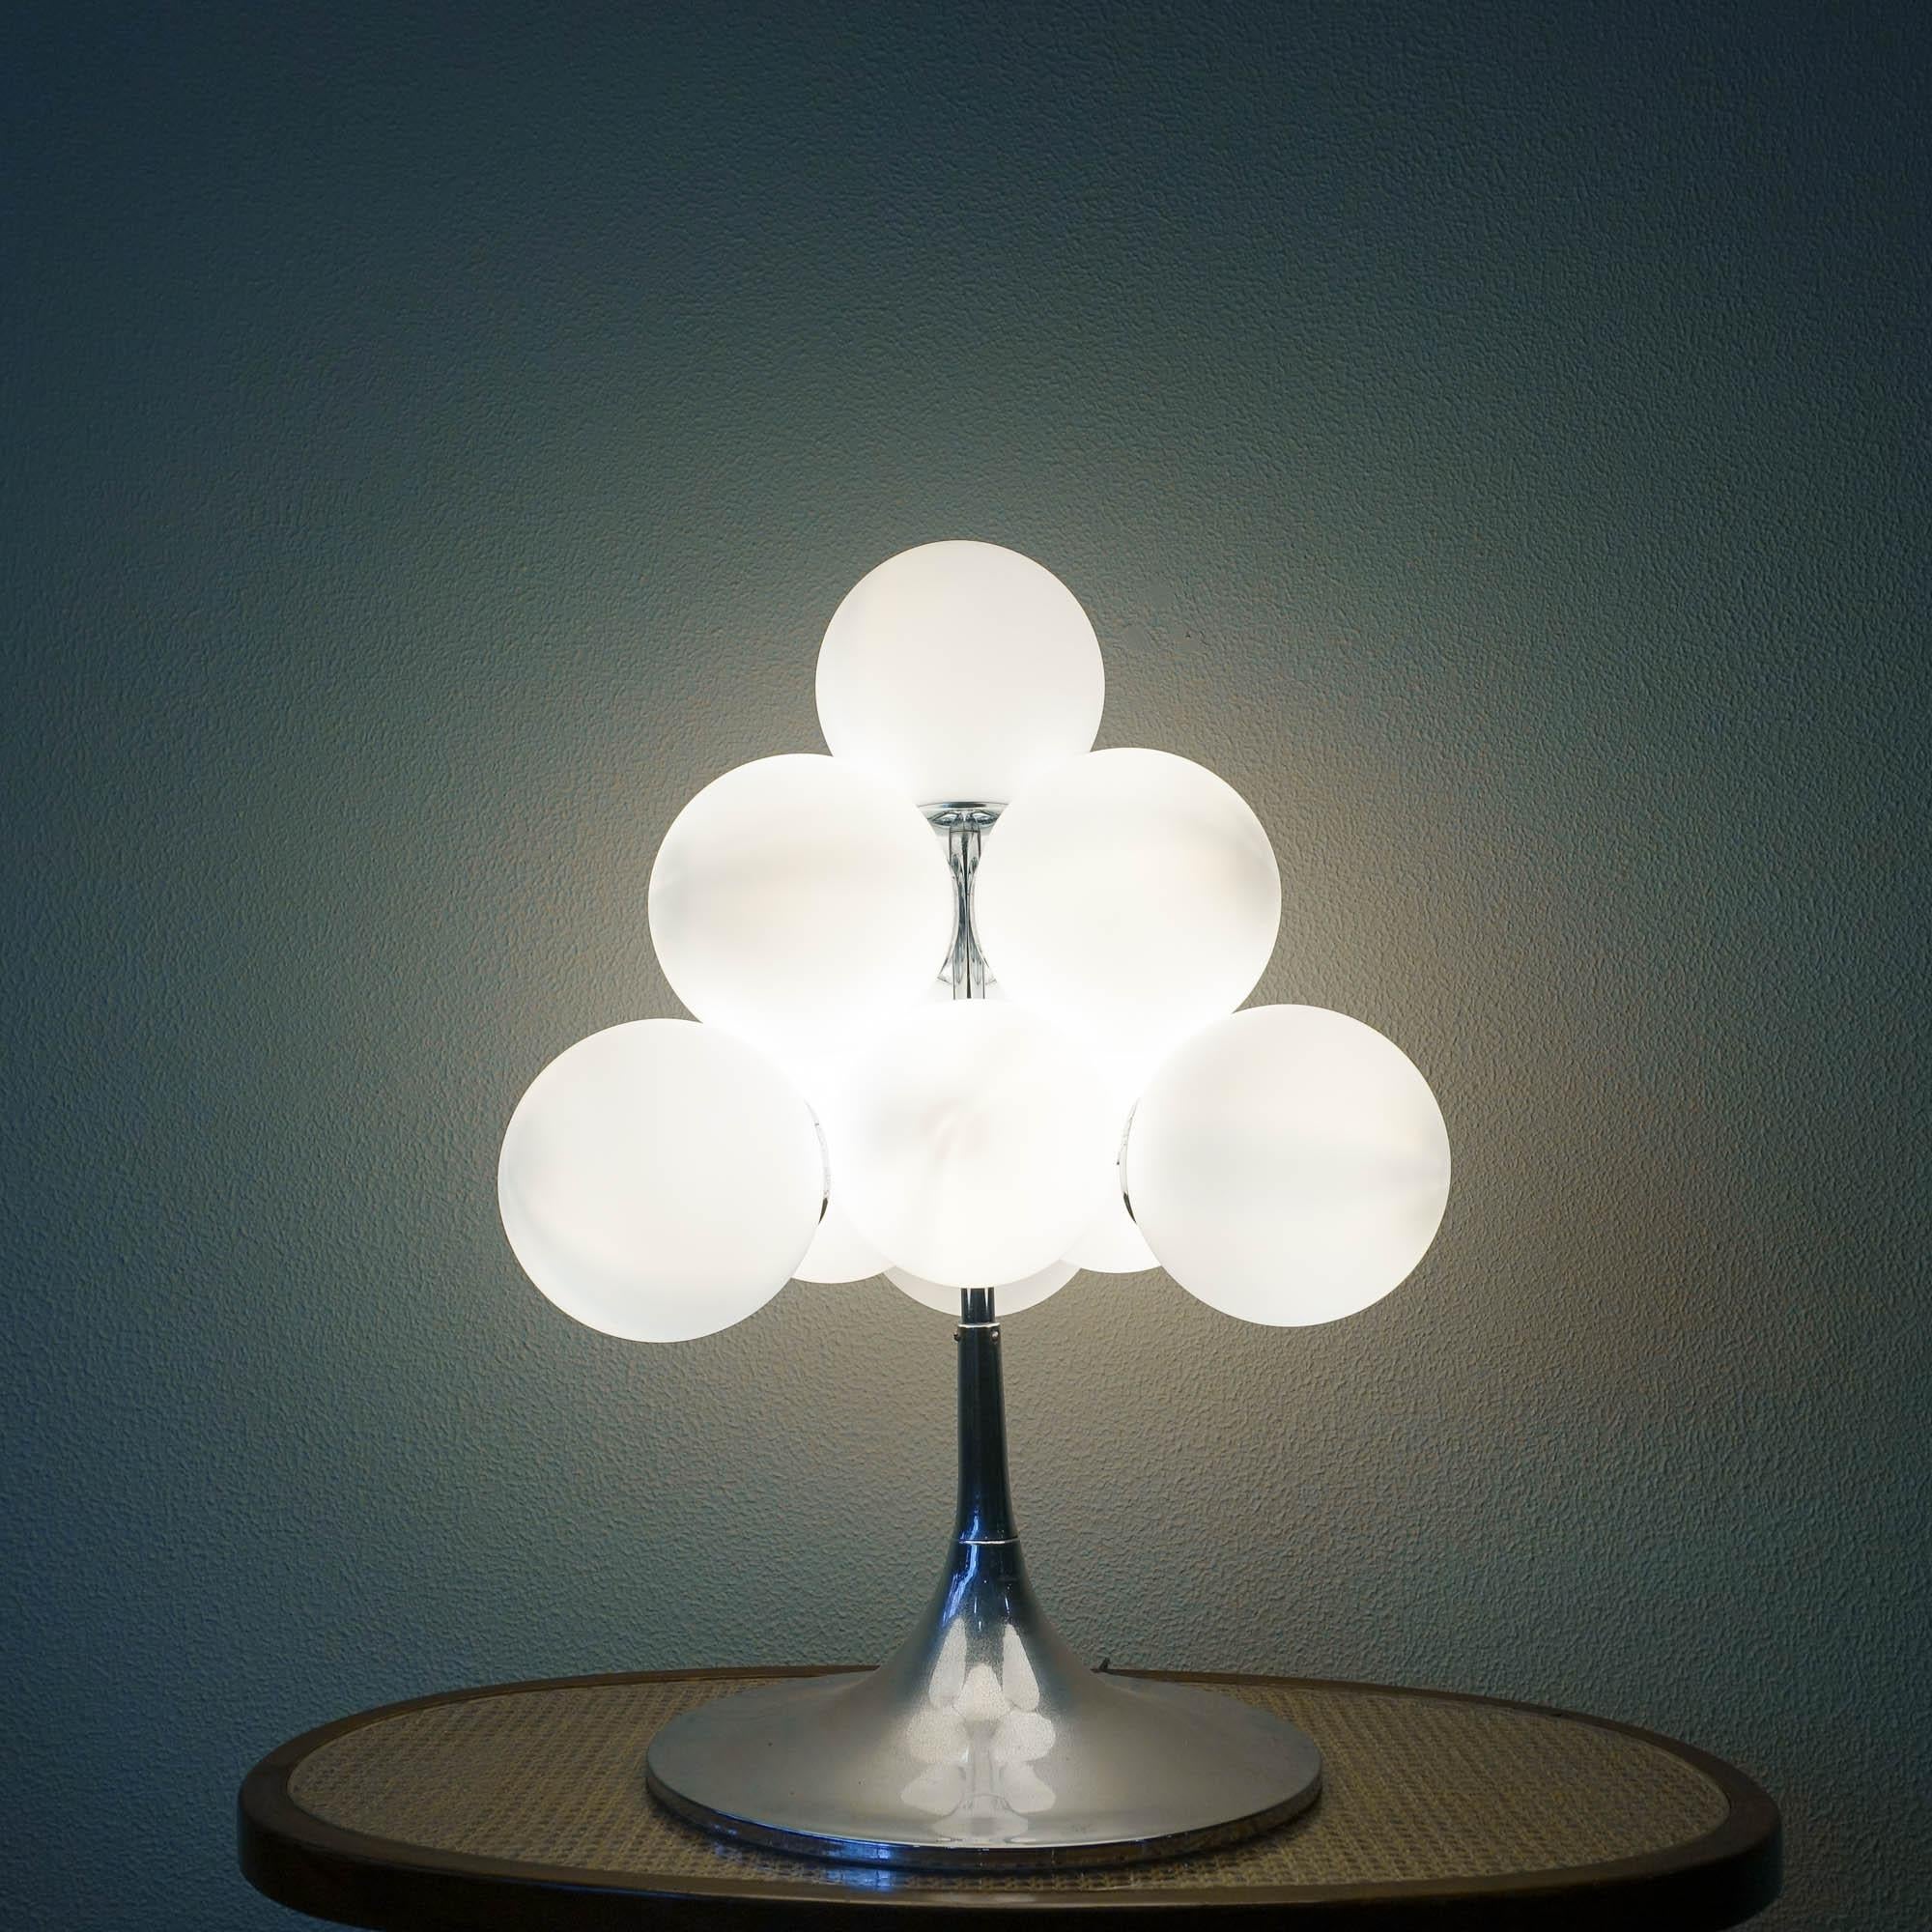 This table lamp was designed by E.R. Nele and produced by Temde, in Switzerland, during the 1960's. It consists of ten frosted glass globes, with 2 different sizes, that are attached to a chrome metal base in a tulip shape and stem. In original and